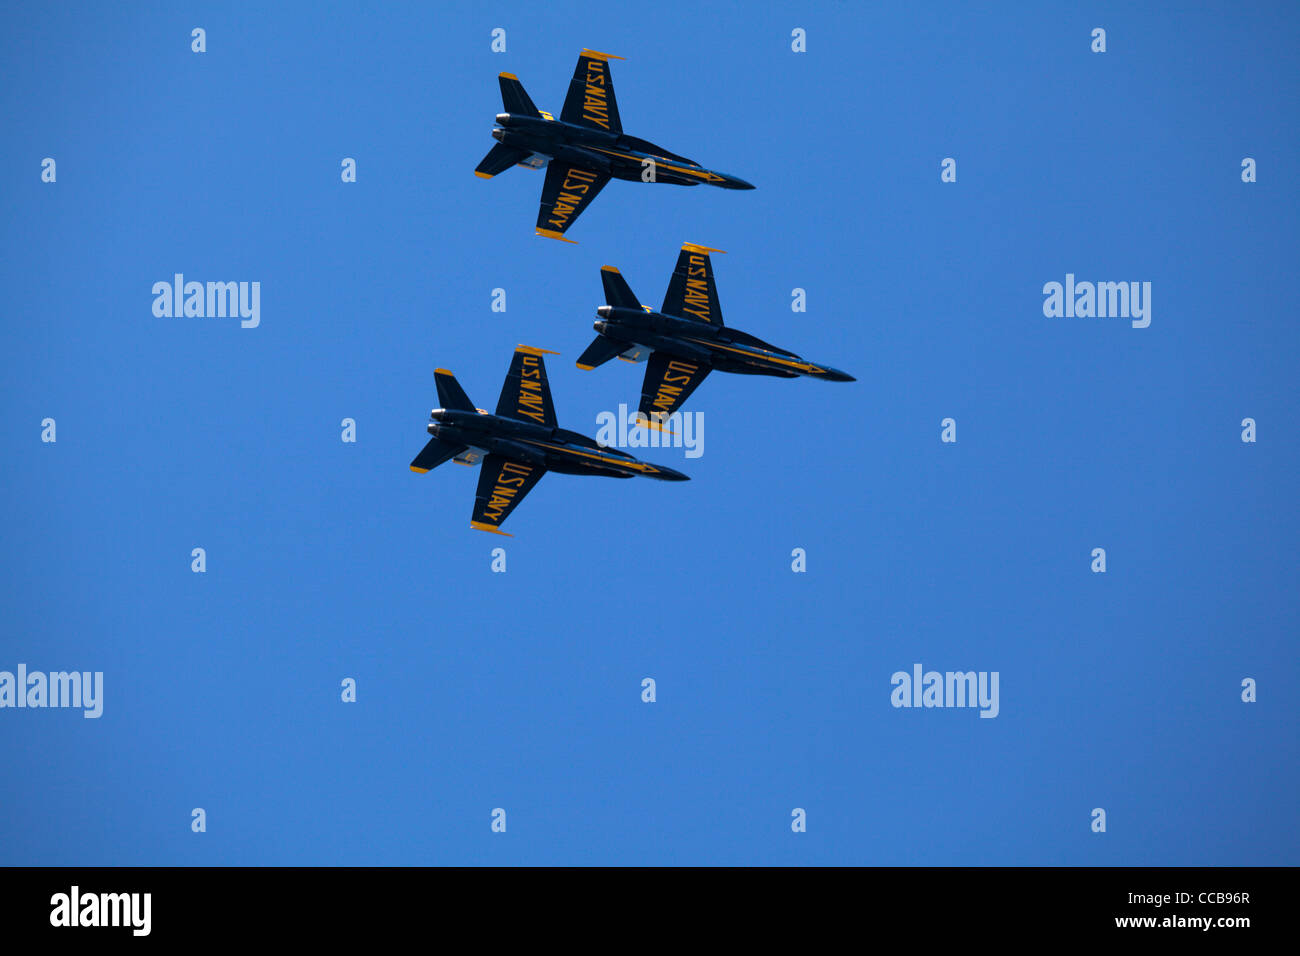 Three USAF Blue Angels fighter jets in tight formation in blue sky. Stock Photo